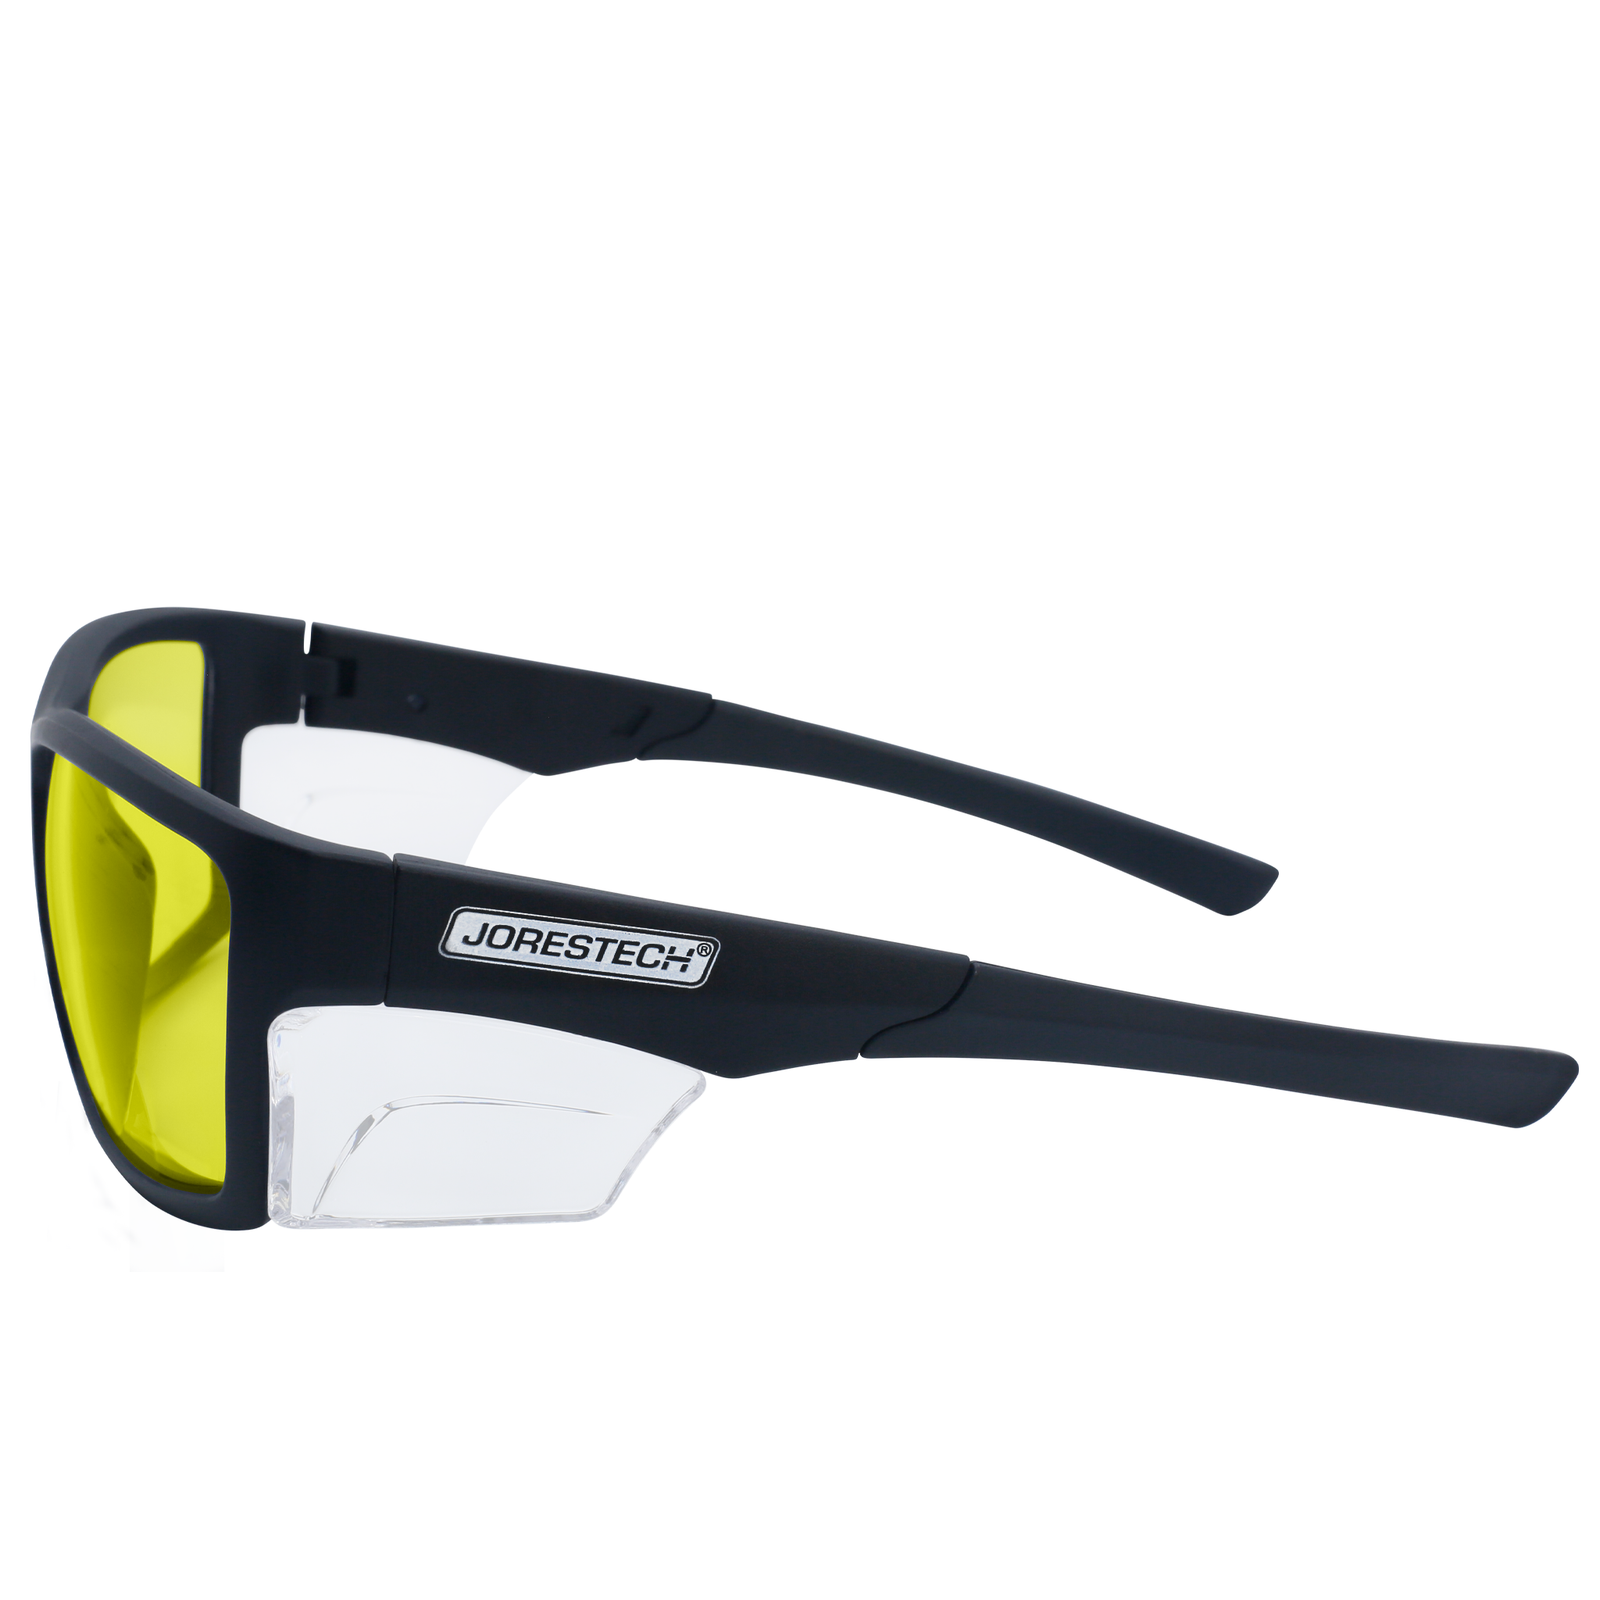 Image shows a side view of the yellow JORESTECH safety Glass with clear side shield for high impact protection. These safety glasses with clear side shields  are ANSI com[pliant and have black frame and yellow polycarbonate lenses. The background of the image is white